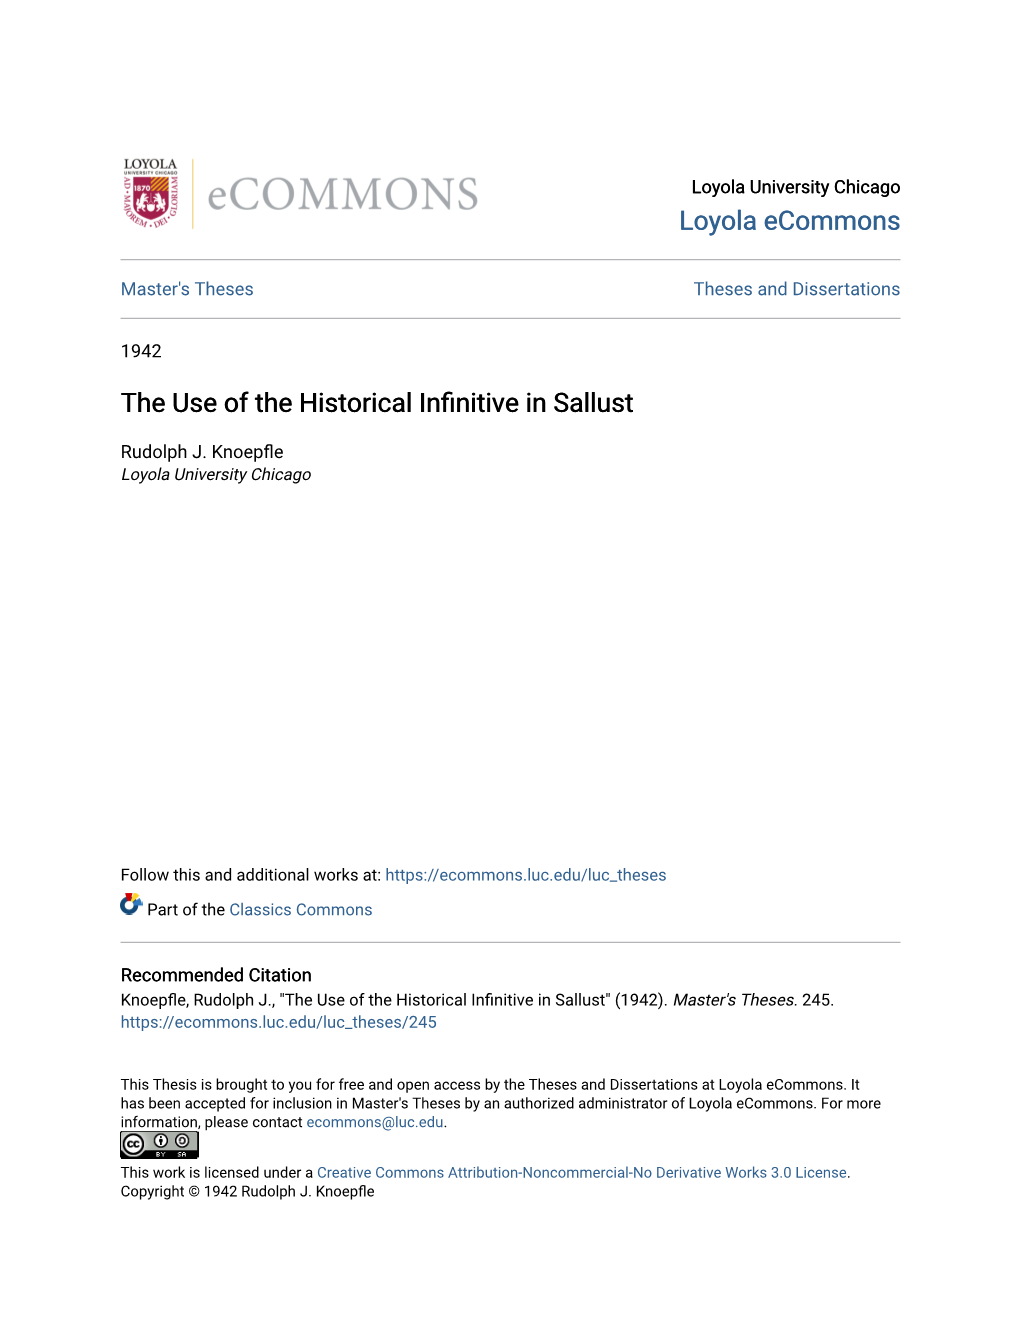 The Use of the Historical Infinitive in Sallust